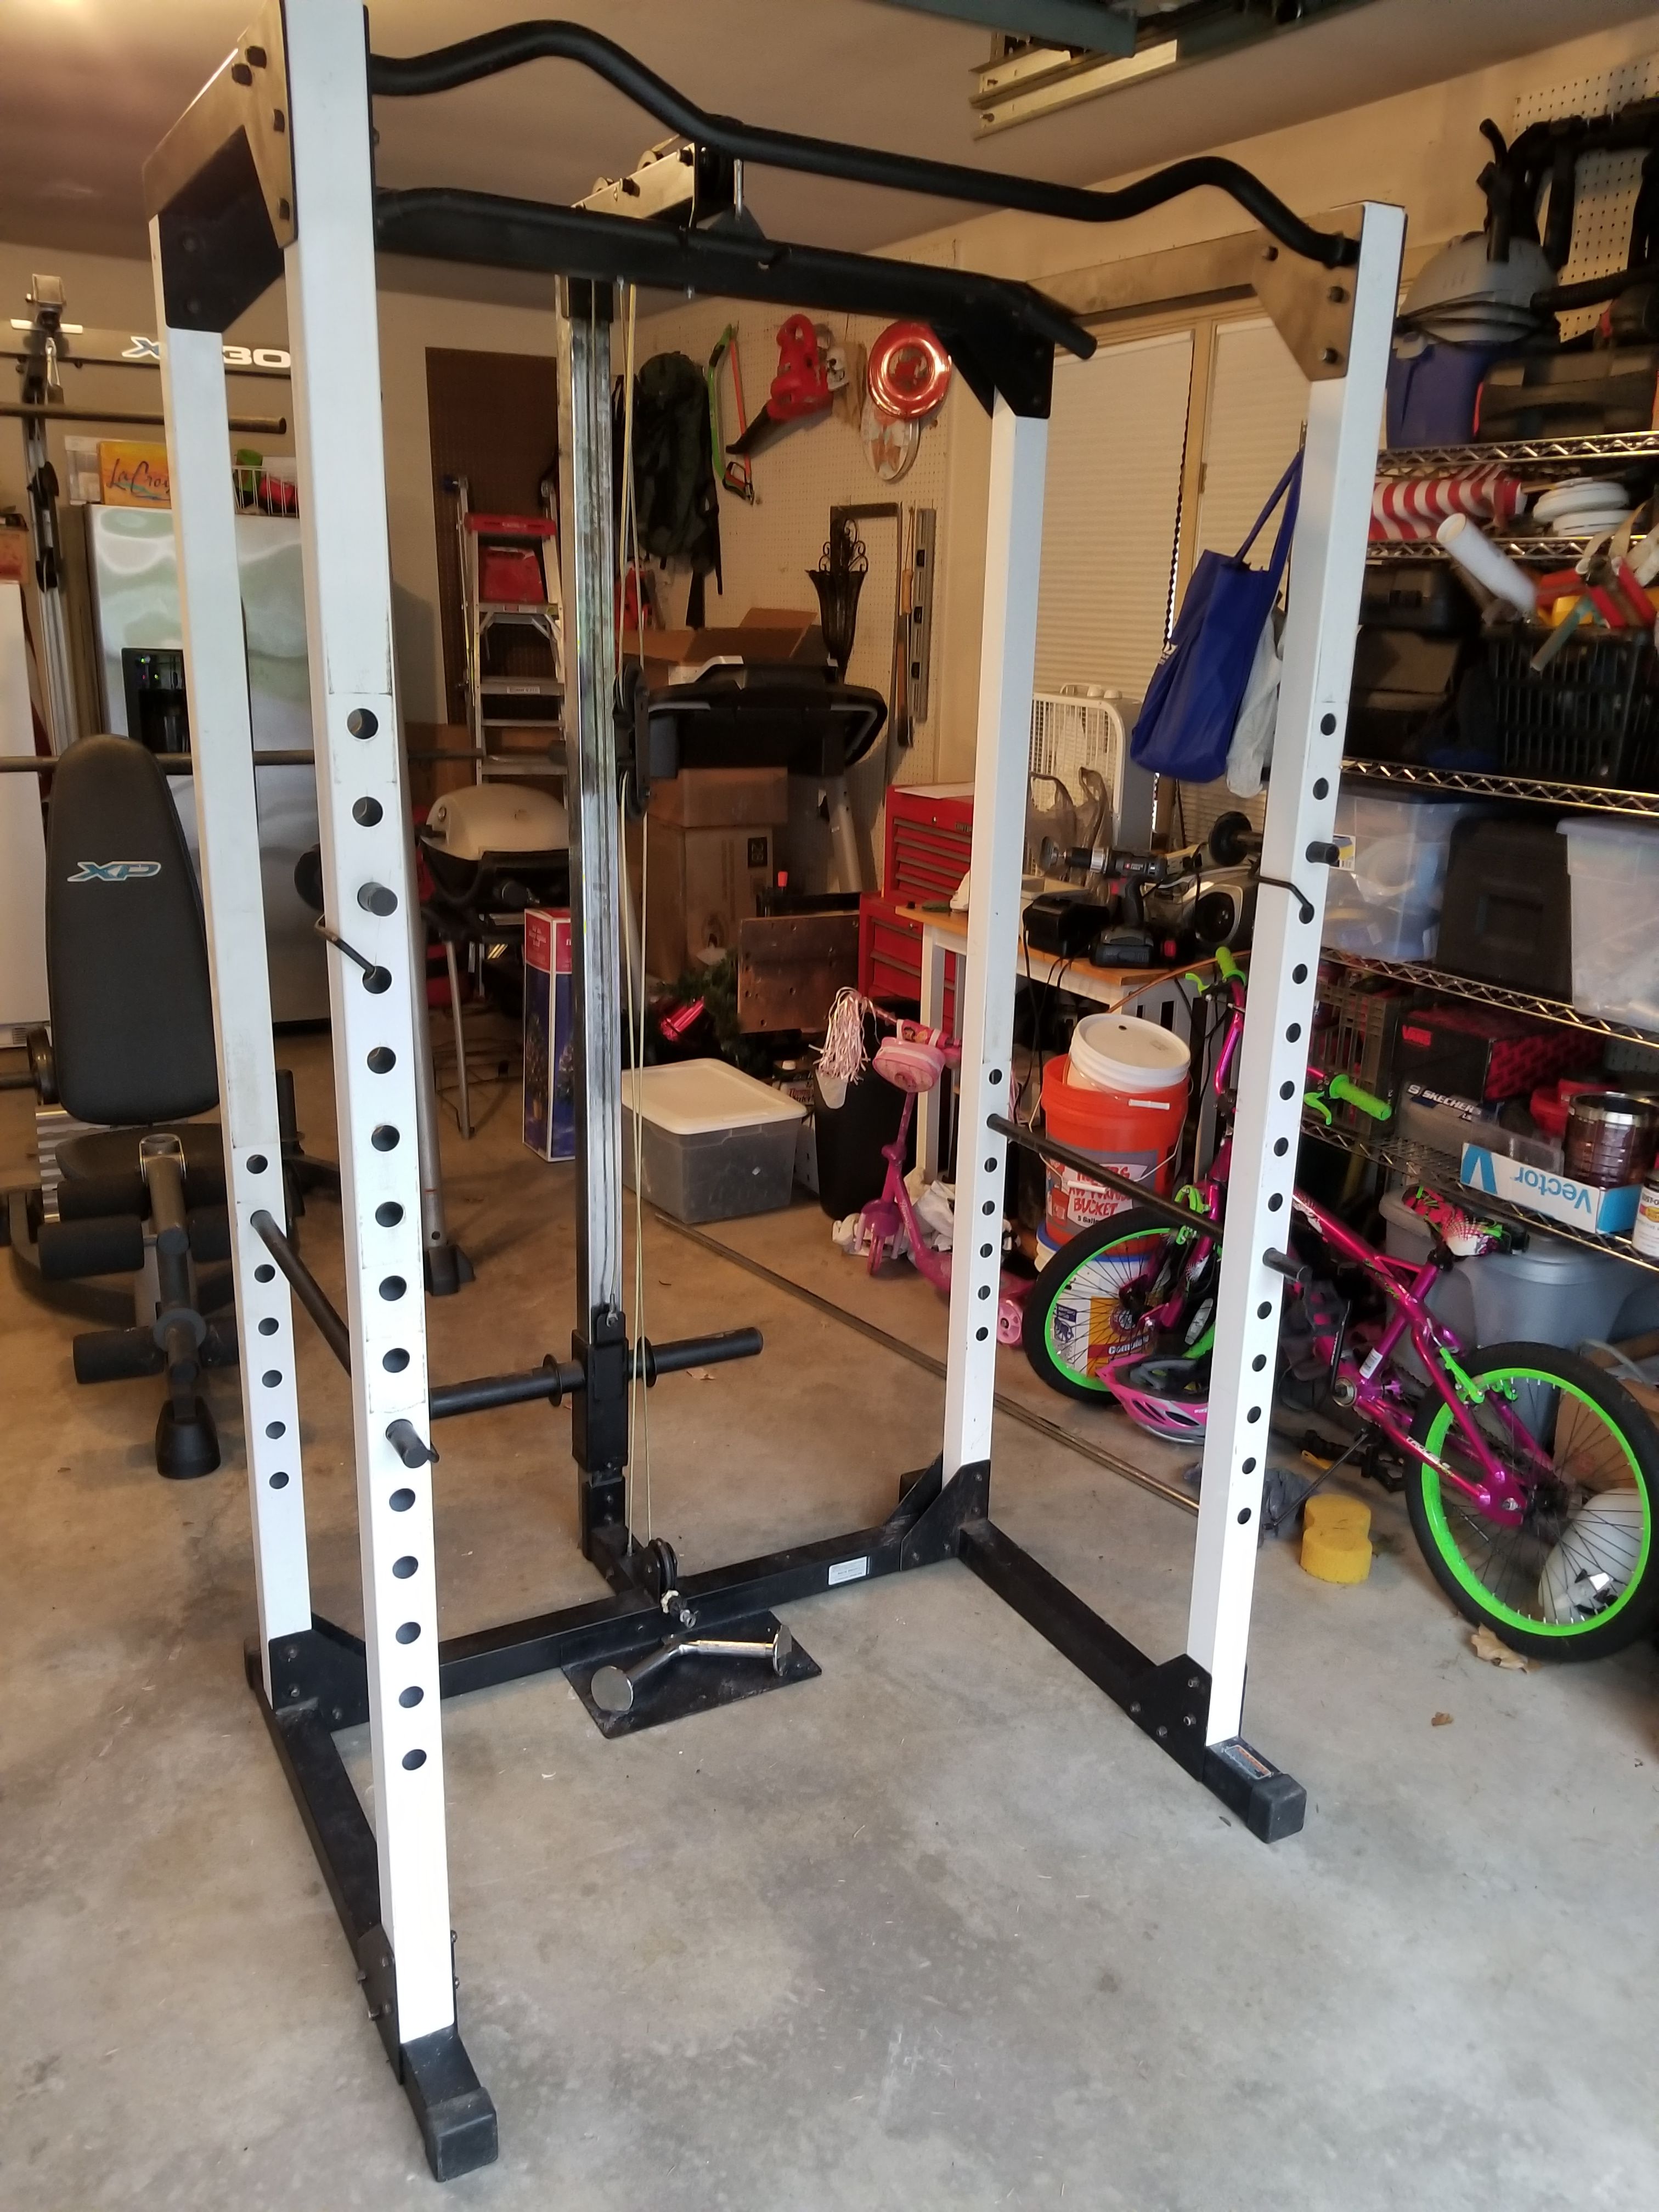 540 Squat Rack/Home Gym for Sale in Lancaster, PA OfferUp